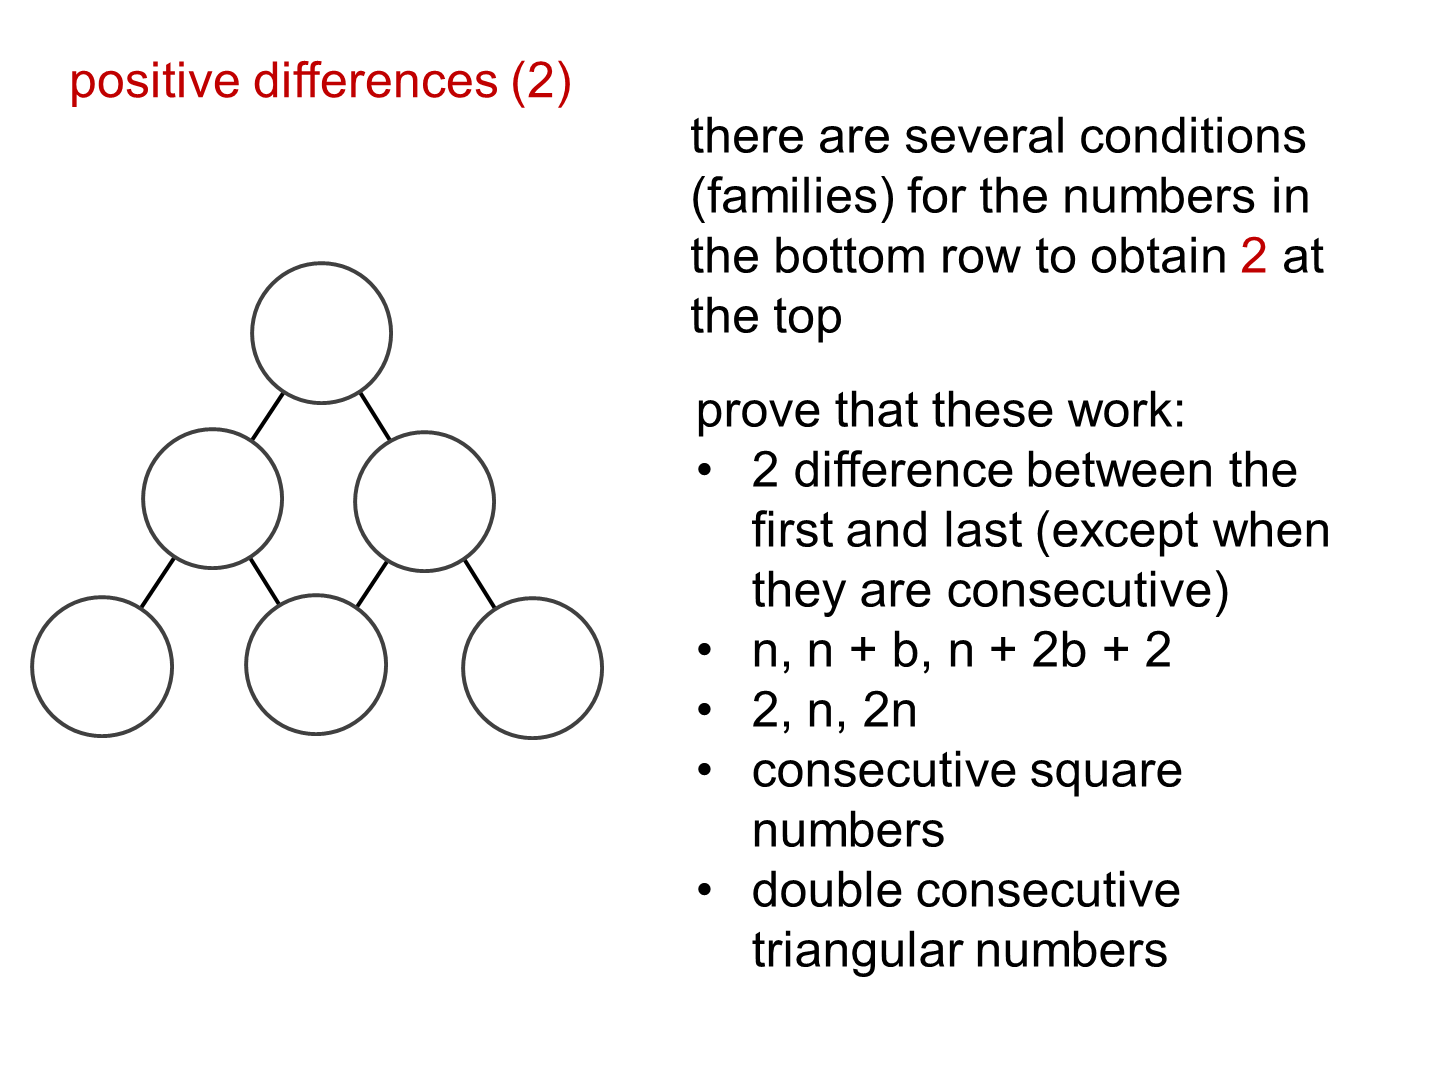 Difference mathematics. Triangle of consecutive odd numbers.